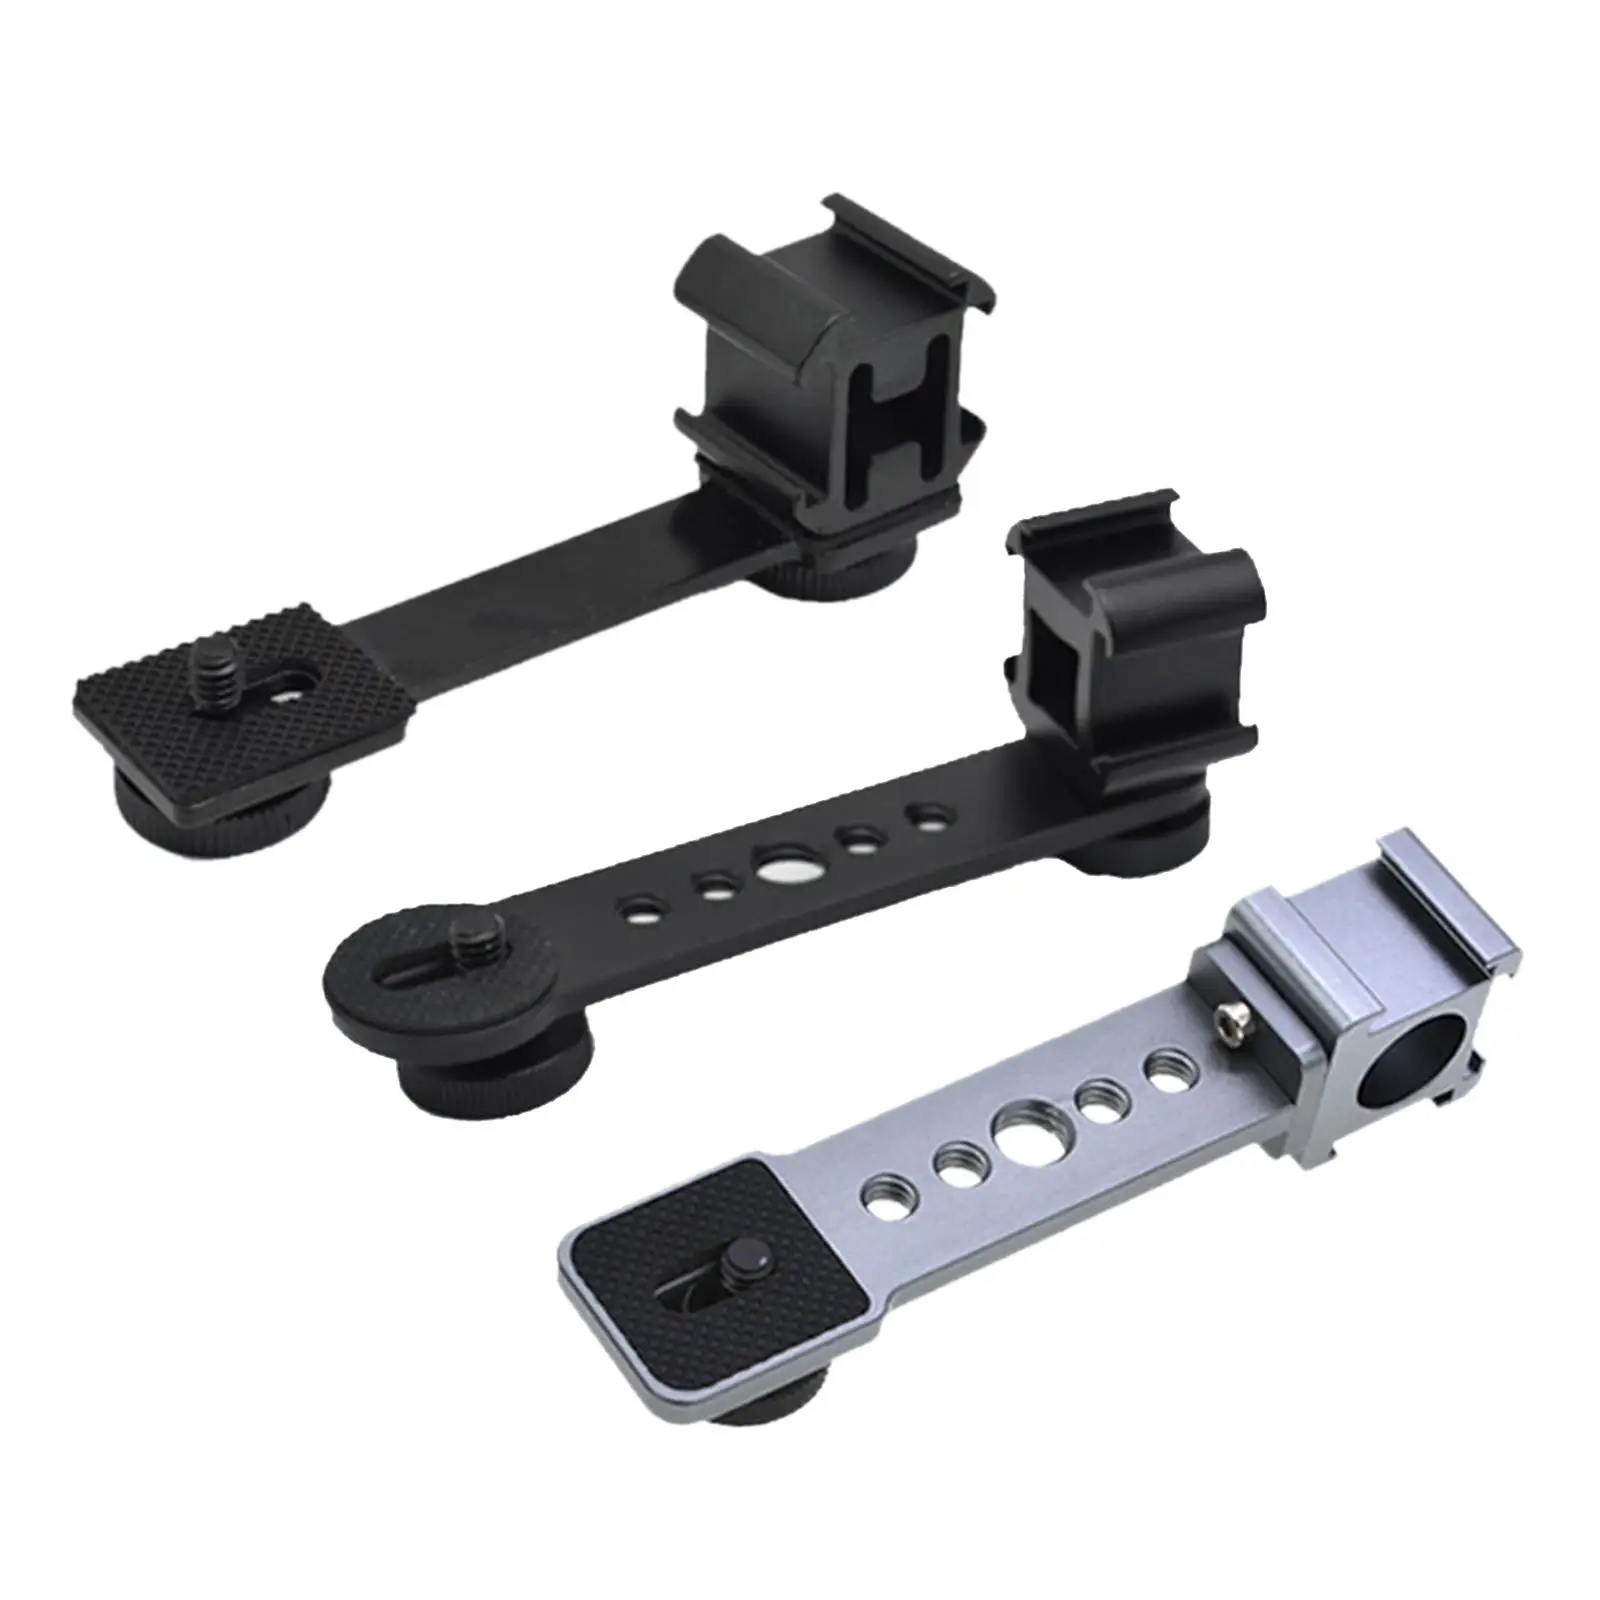 Triple Cold Shoe Mount Microphone Bar Bracket for Smooth 4